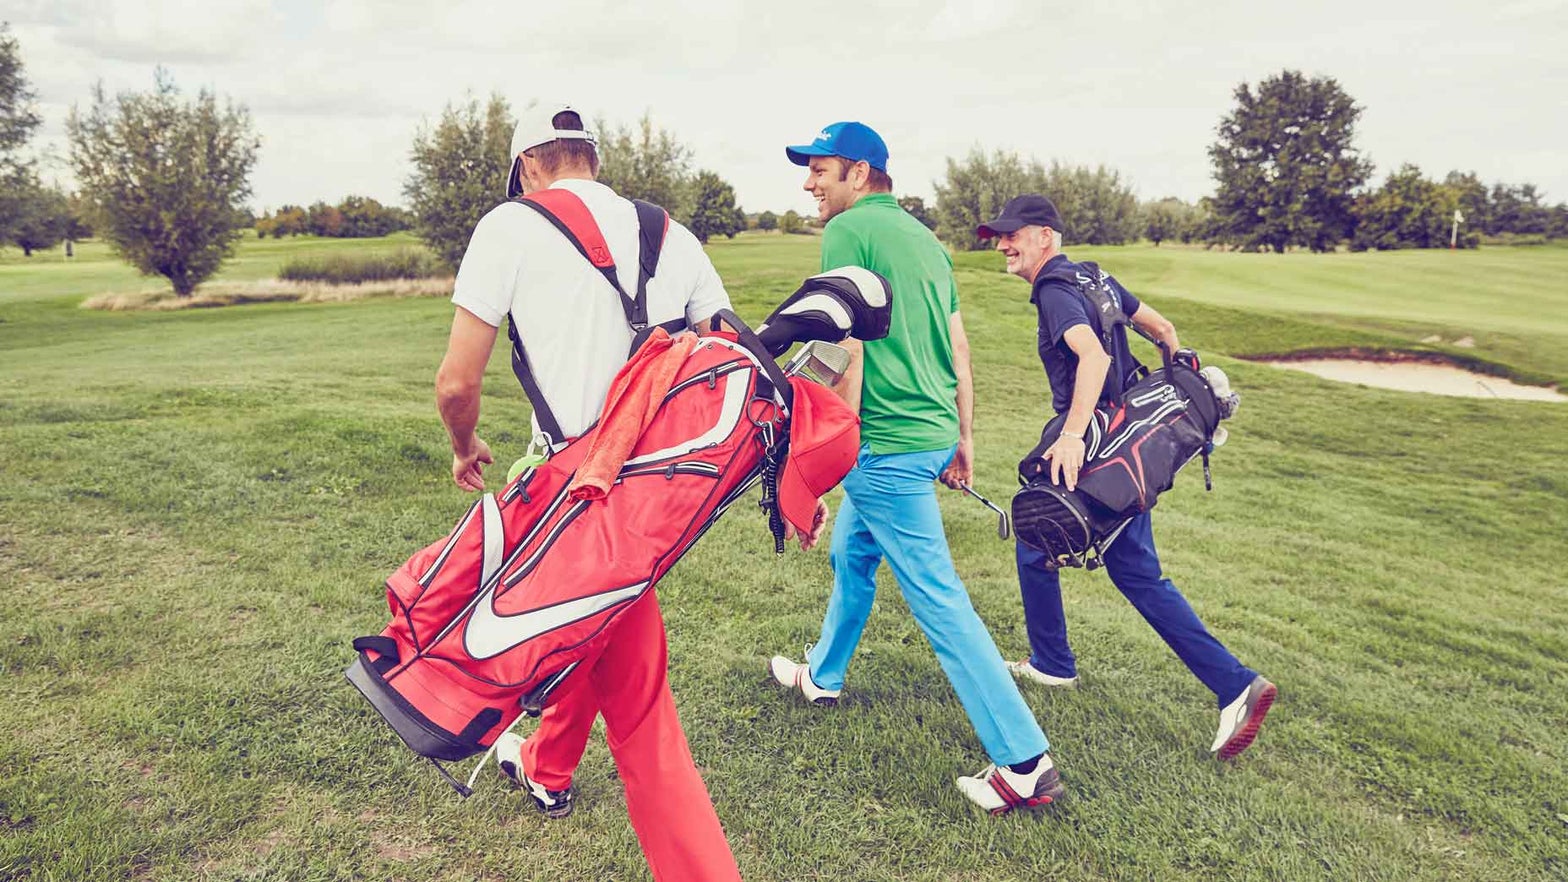 4 keys for reserving the right golf journey together with your buddies